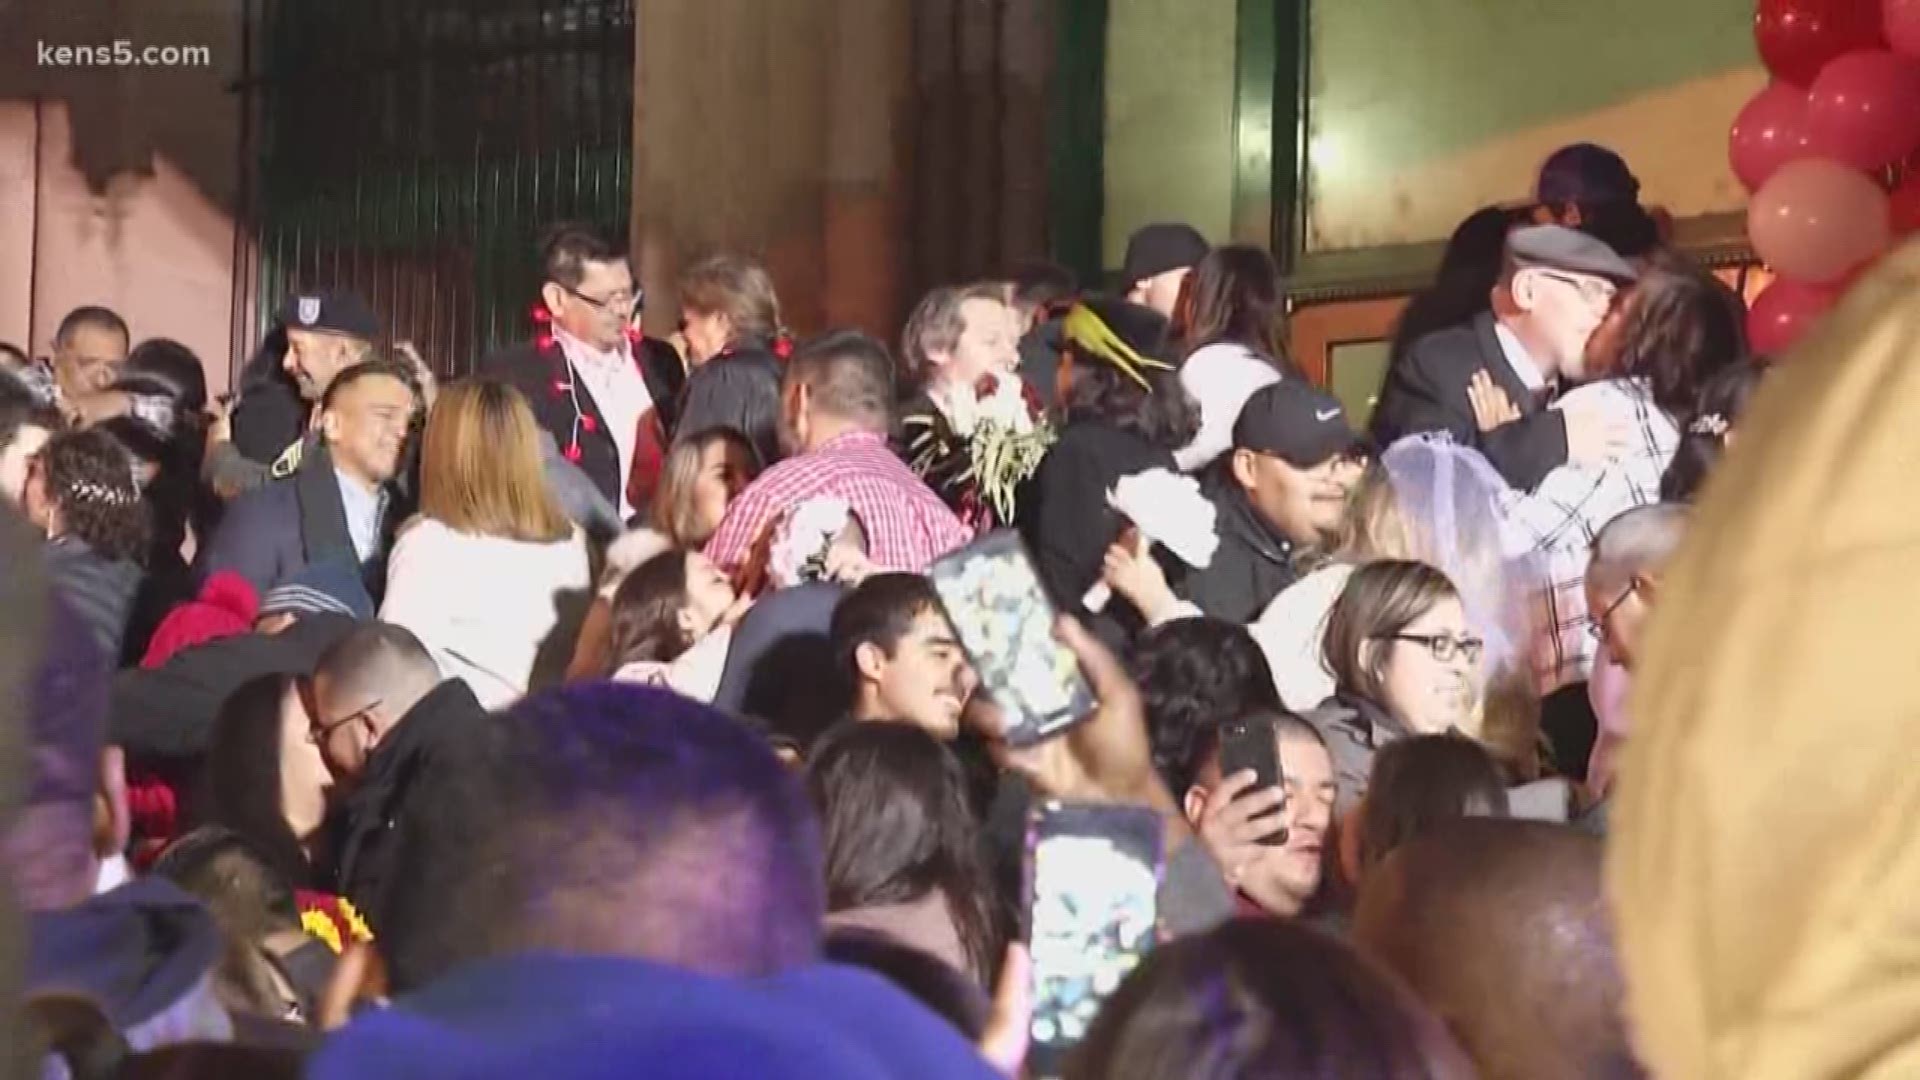 For better, for worse, for warmer, for colder! More than 100 couples bundled up this morning to say their vows on the steps of the Bexar County Courthouse.